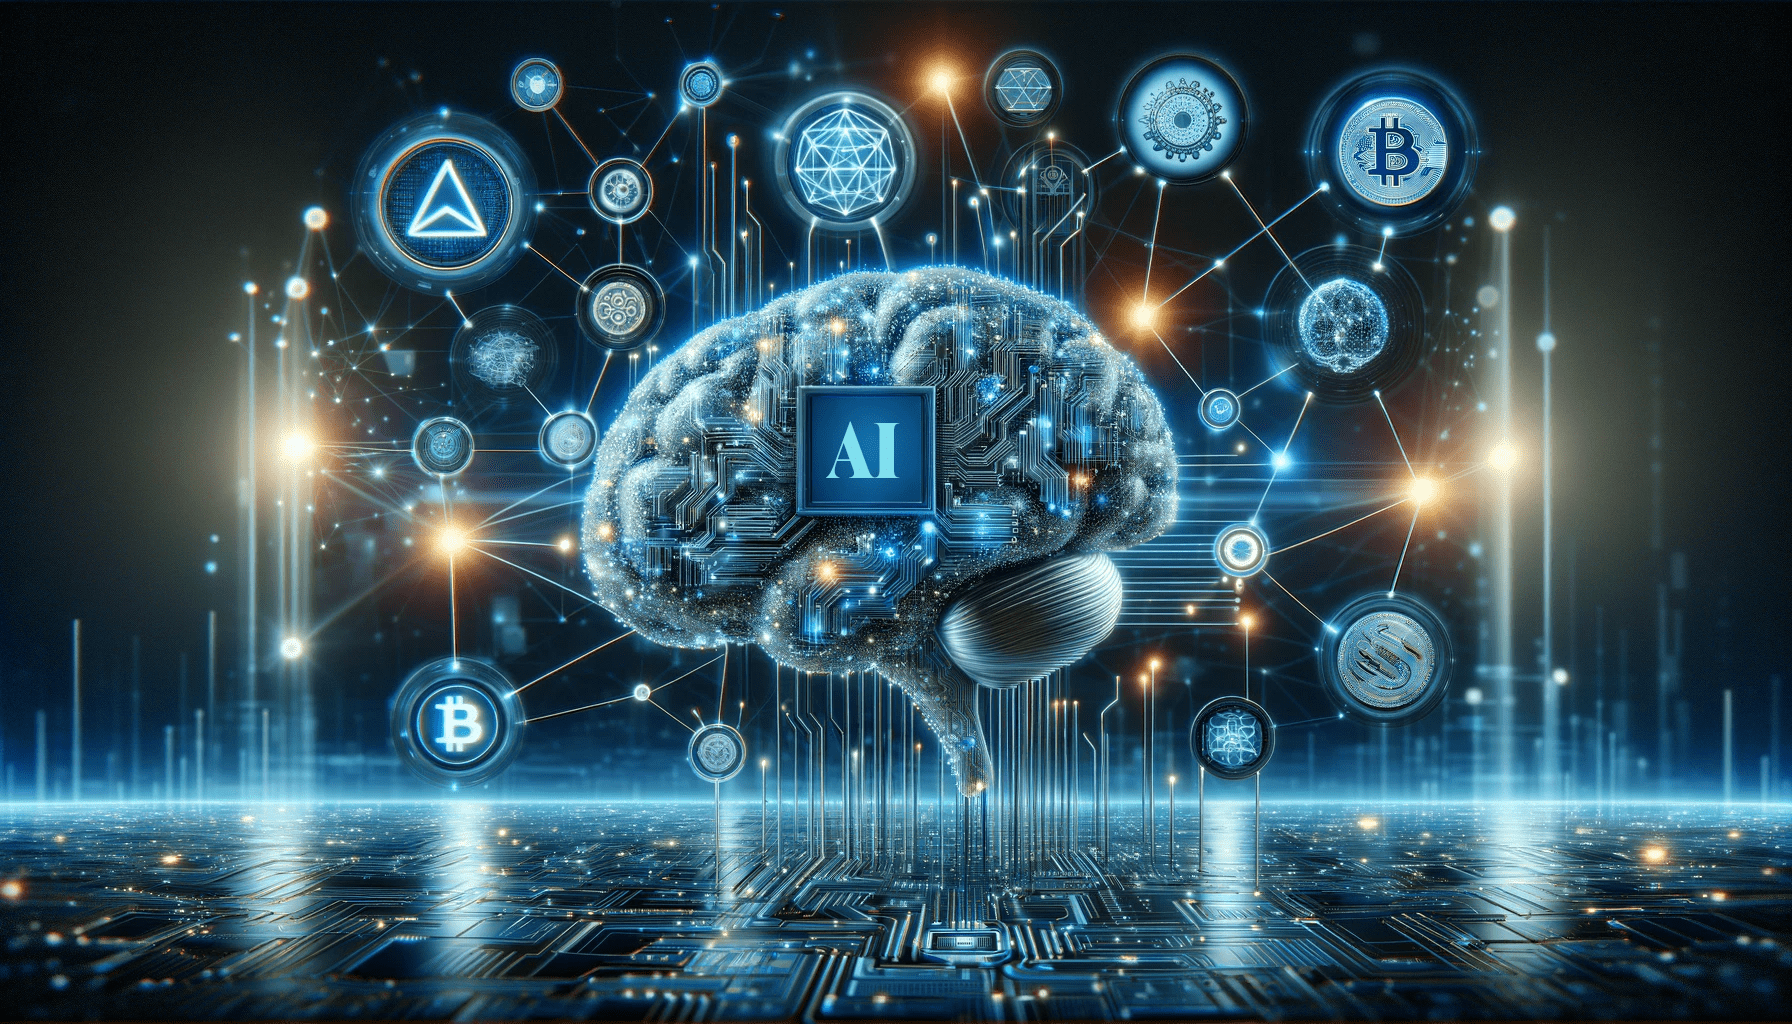 The Synergy of AI and DeFi: Reshaping the Future of Finance blog post by Kelly Reddington of WisdomTree